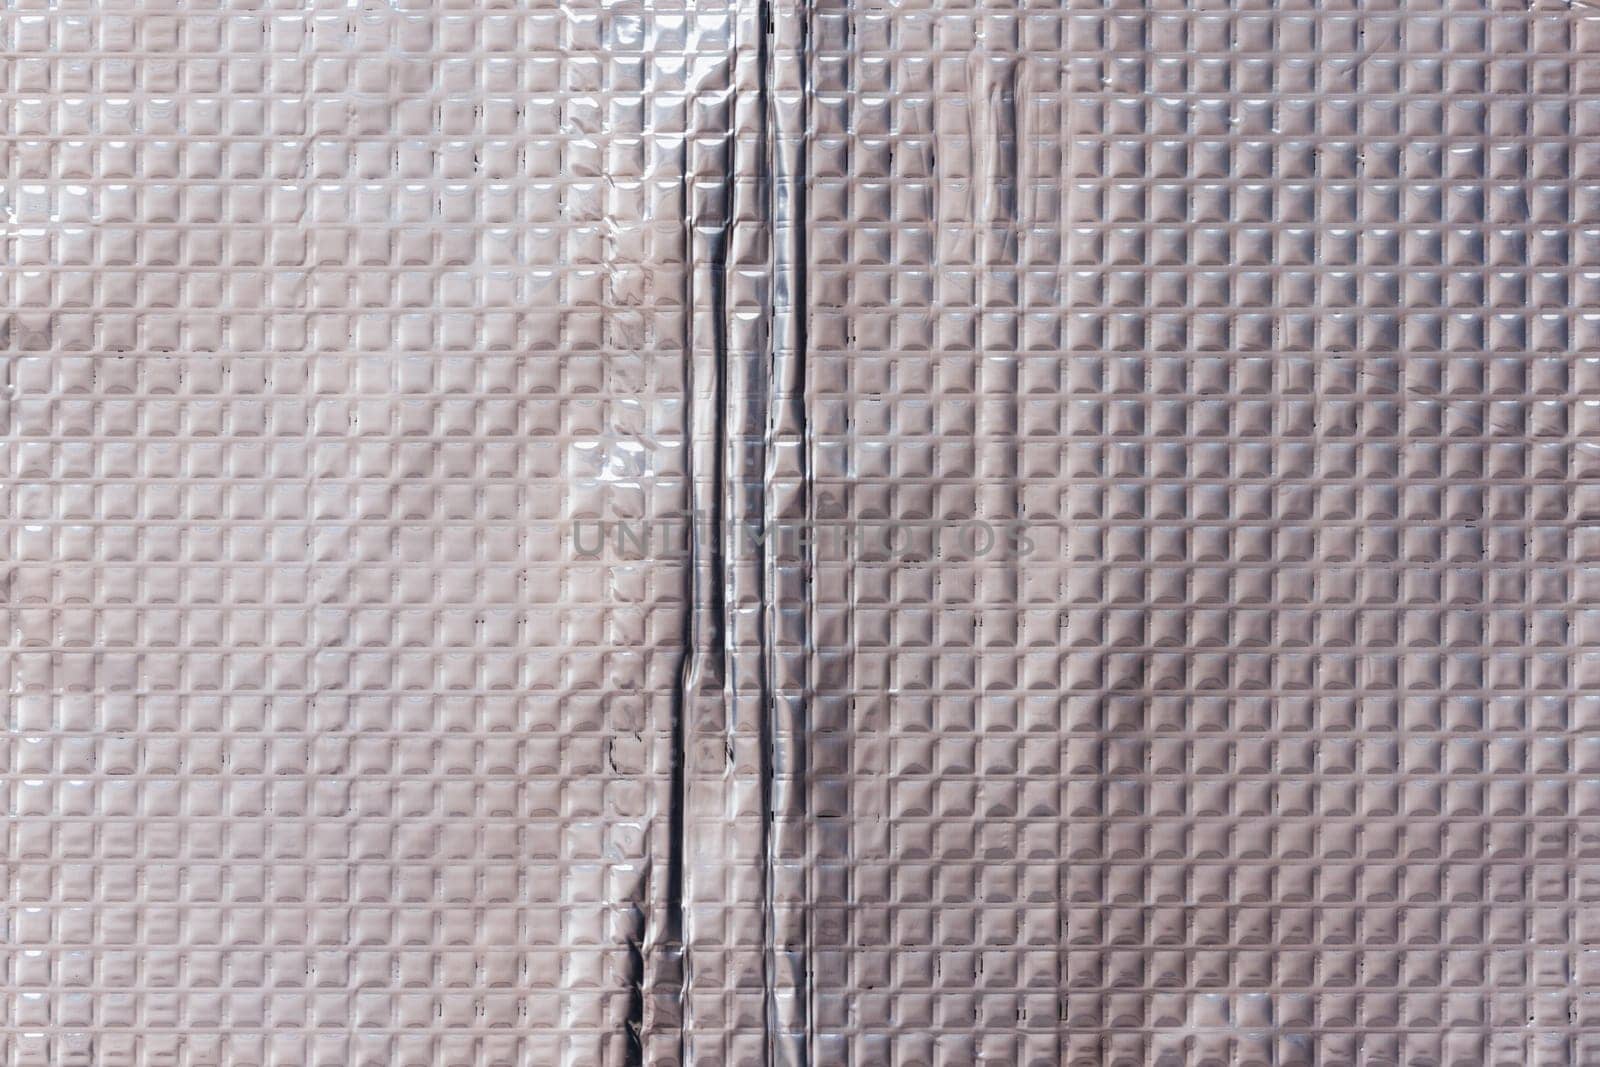 Full-frame texture of aluminum coated butil rubber sheet with square pattern. This material is used for sound dampening in car interiors and vibration resonance reducing and acoustic improving.